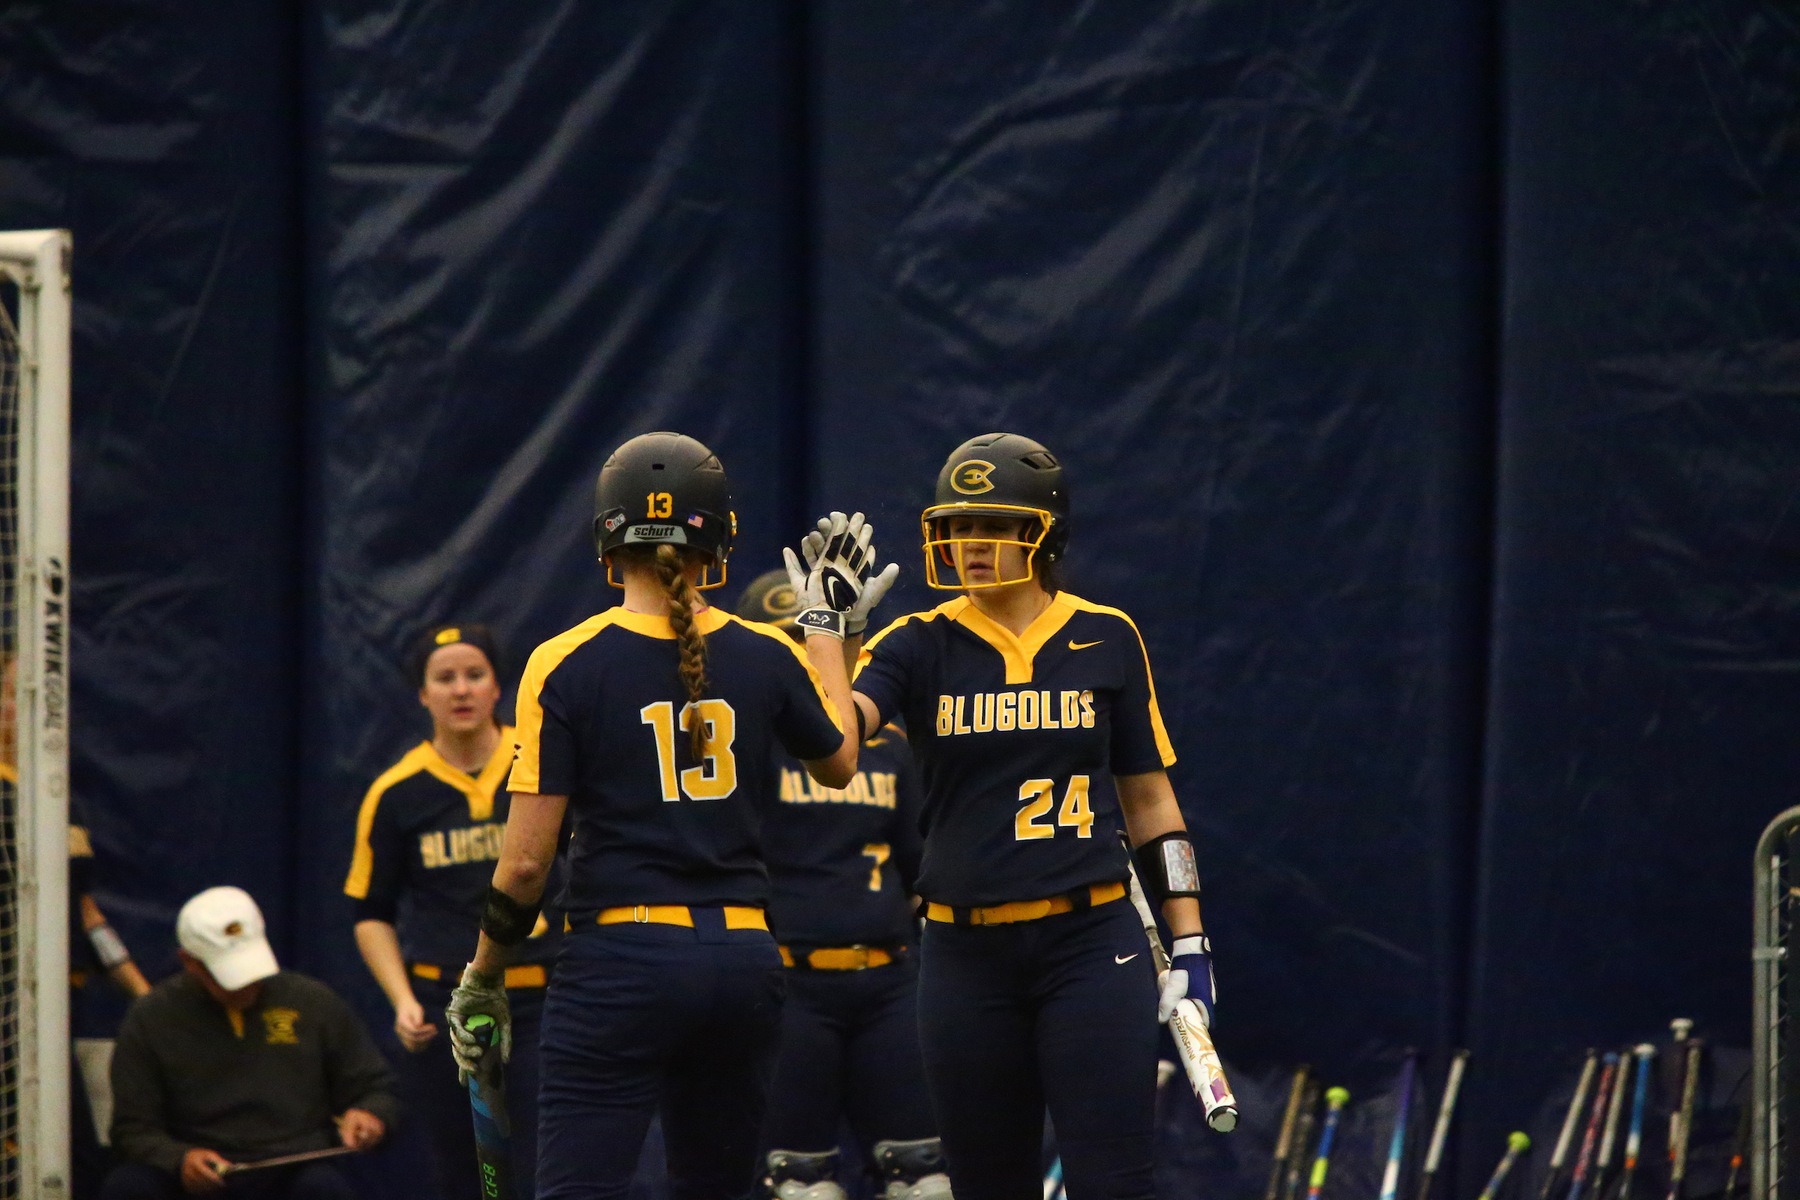 Two More Spring Break Victories for Blugolds Softball